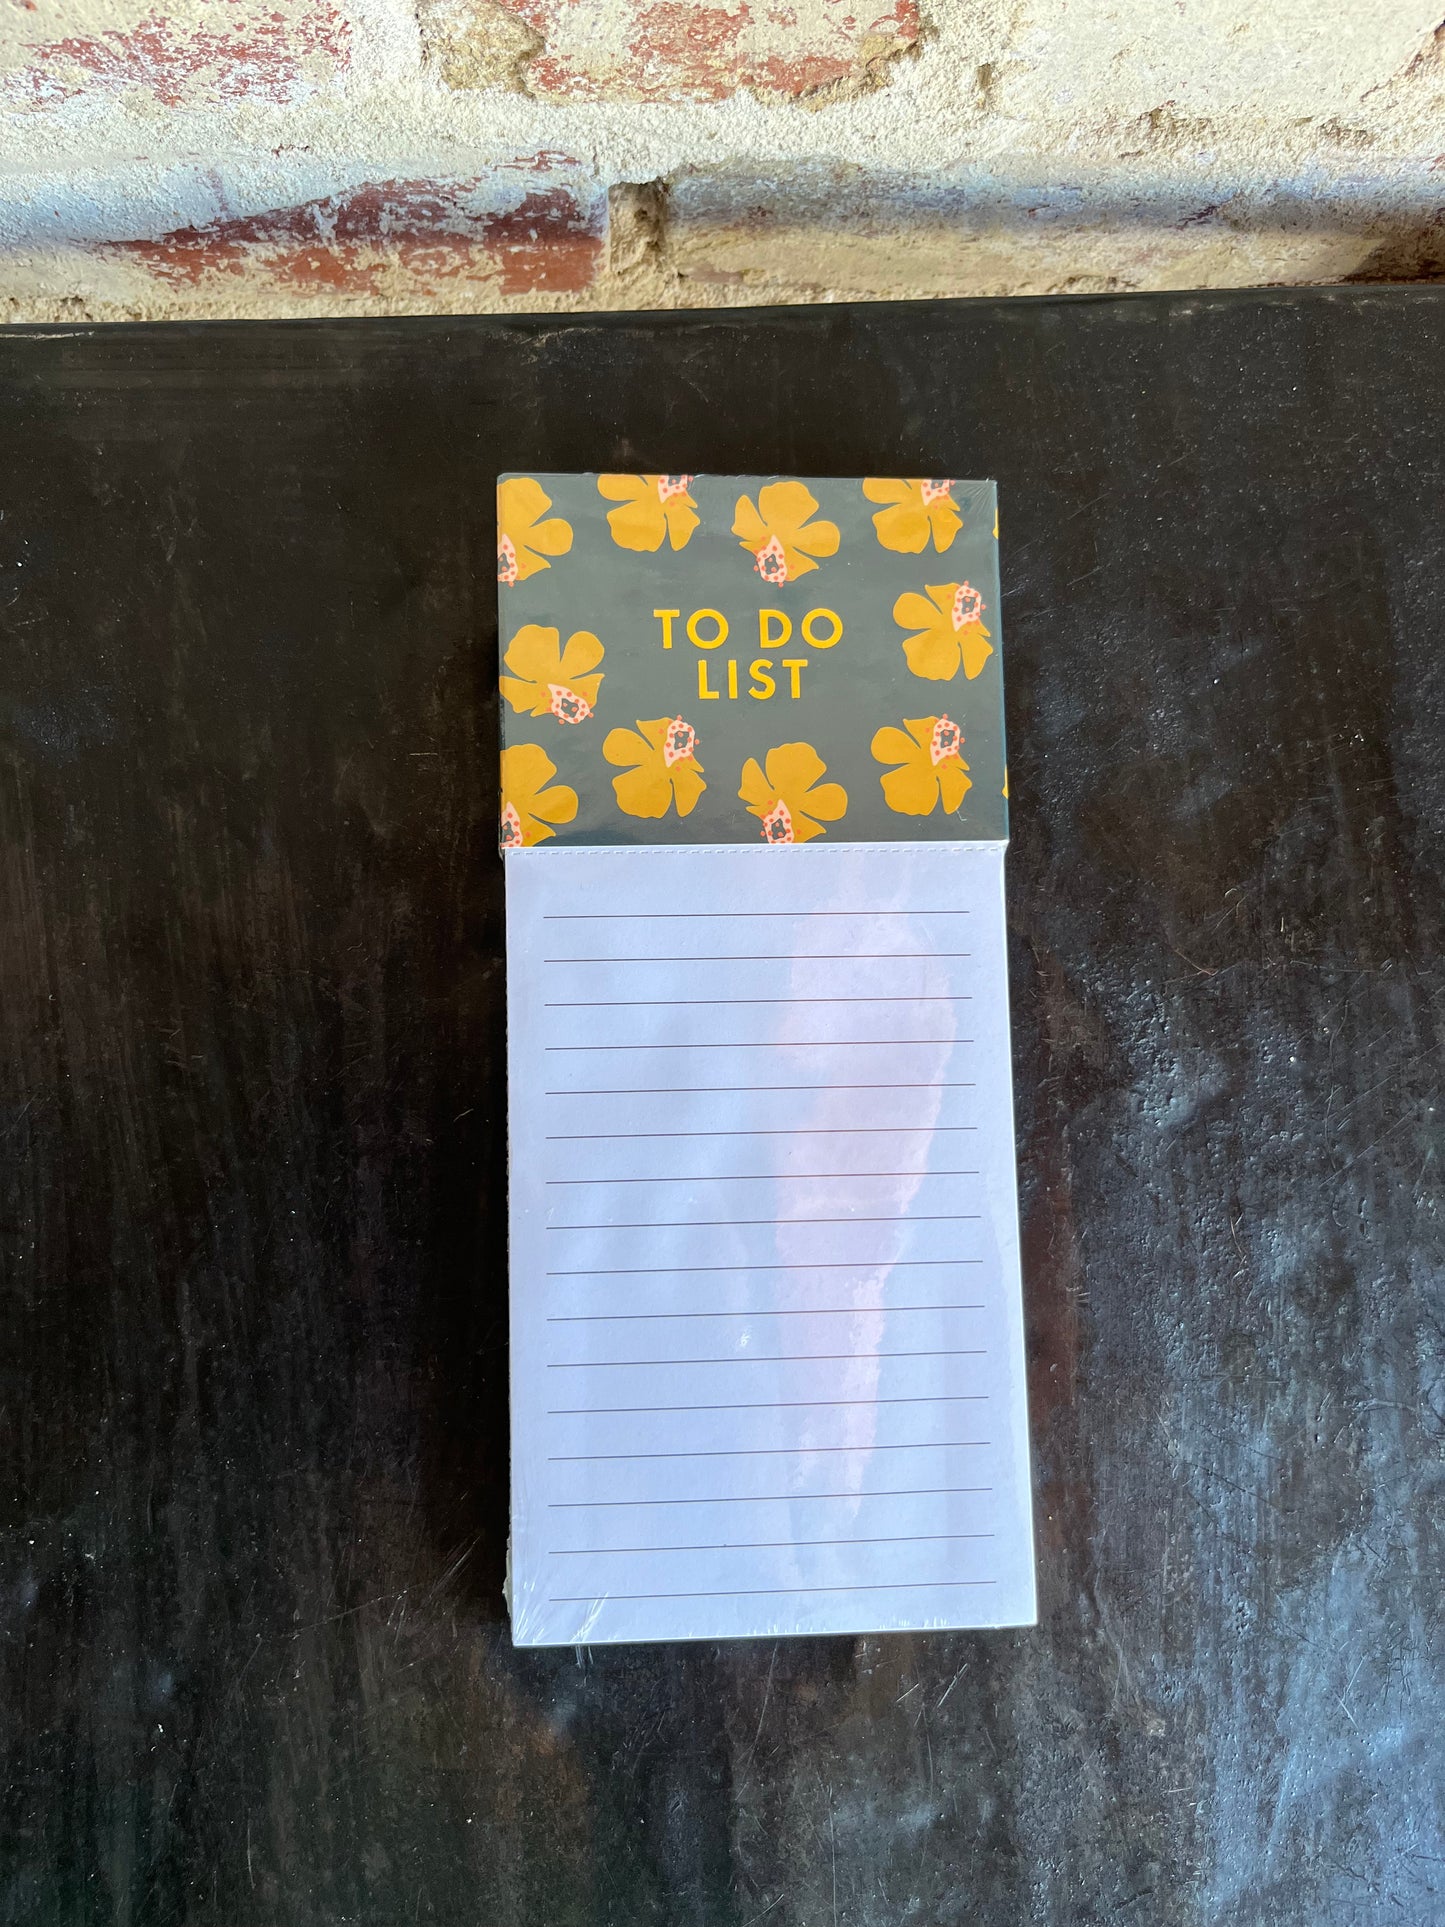 To Do List Magnetic Notepad